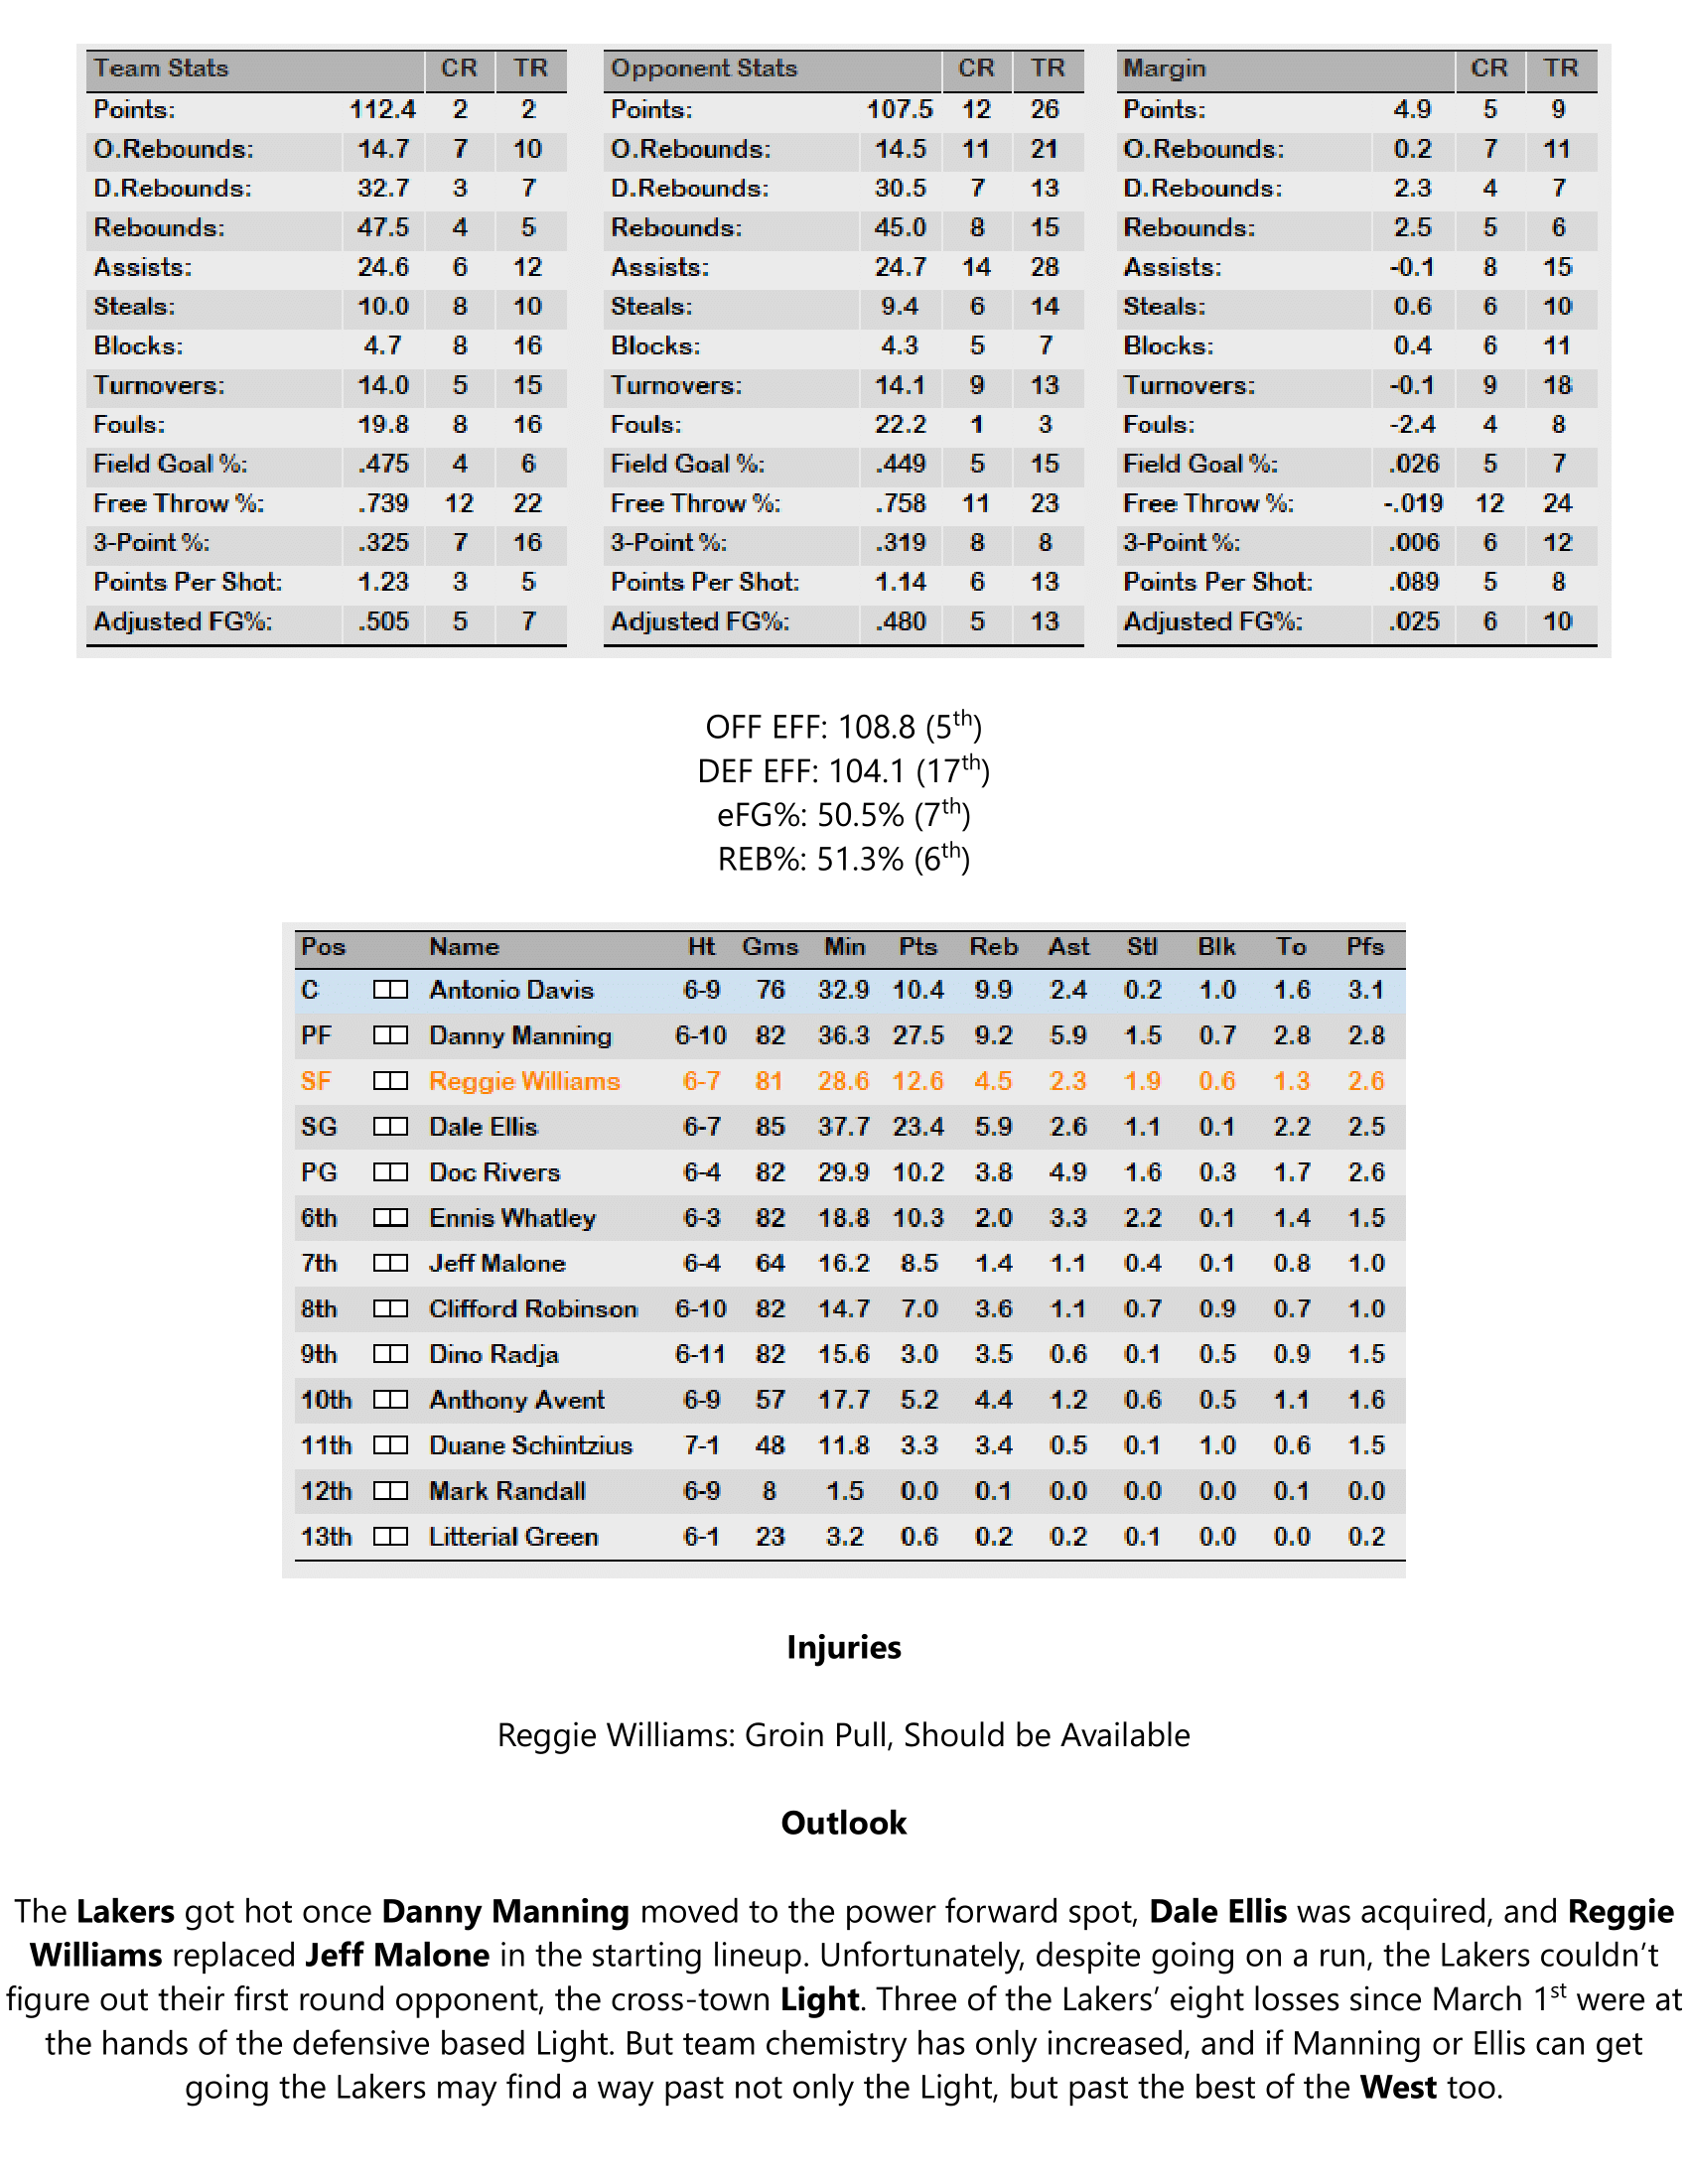 92-93-Part-4-Playoff-Preview-08.png